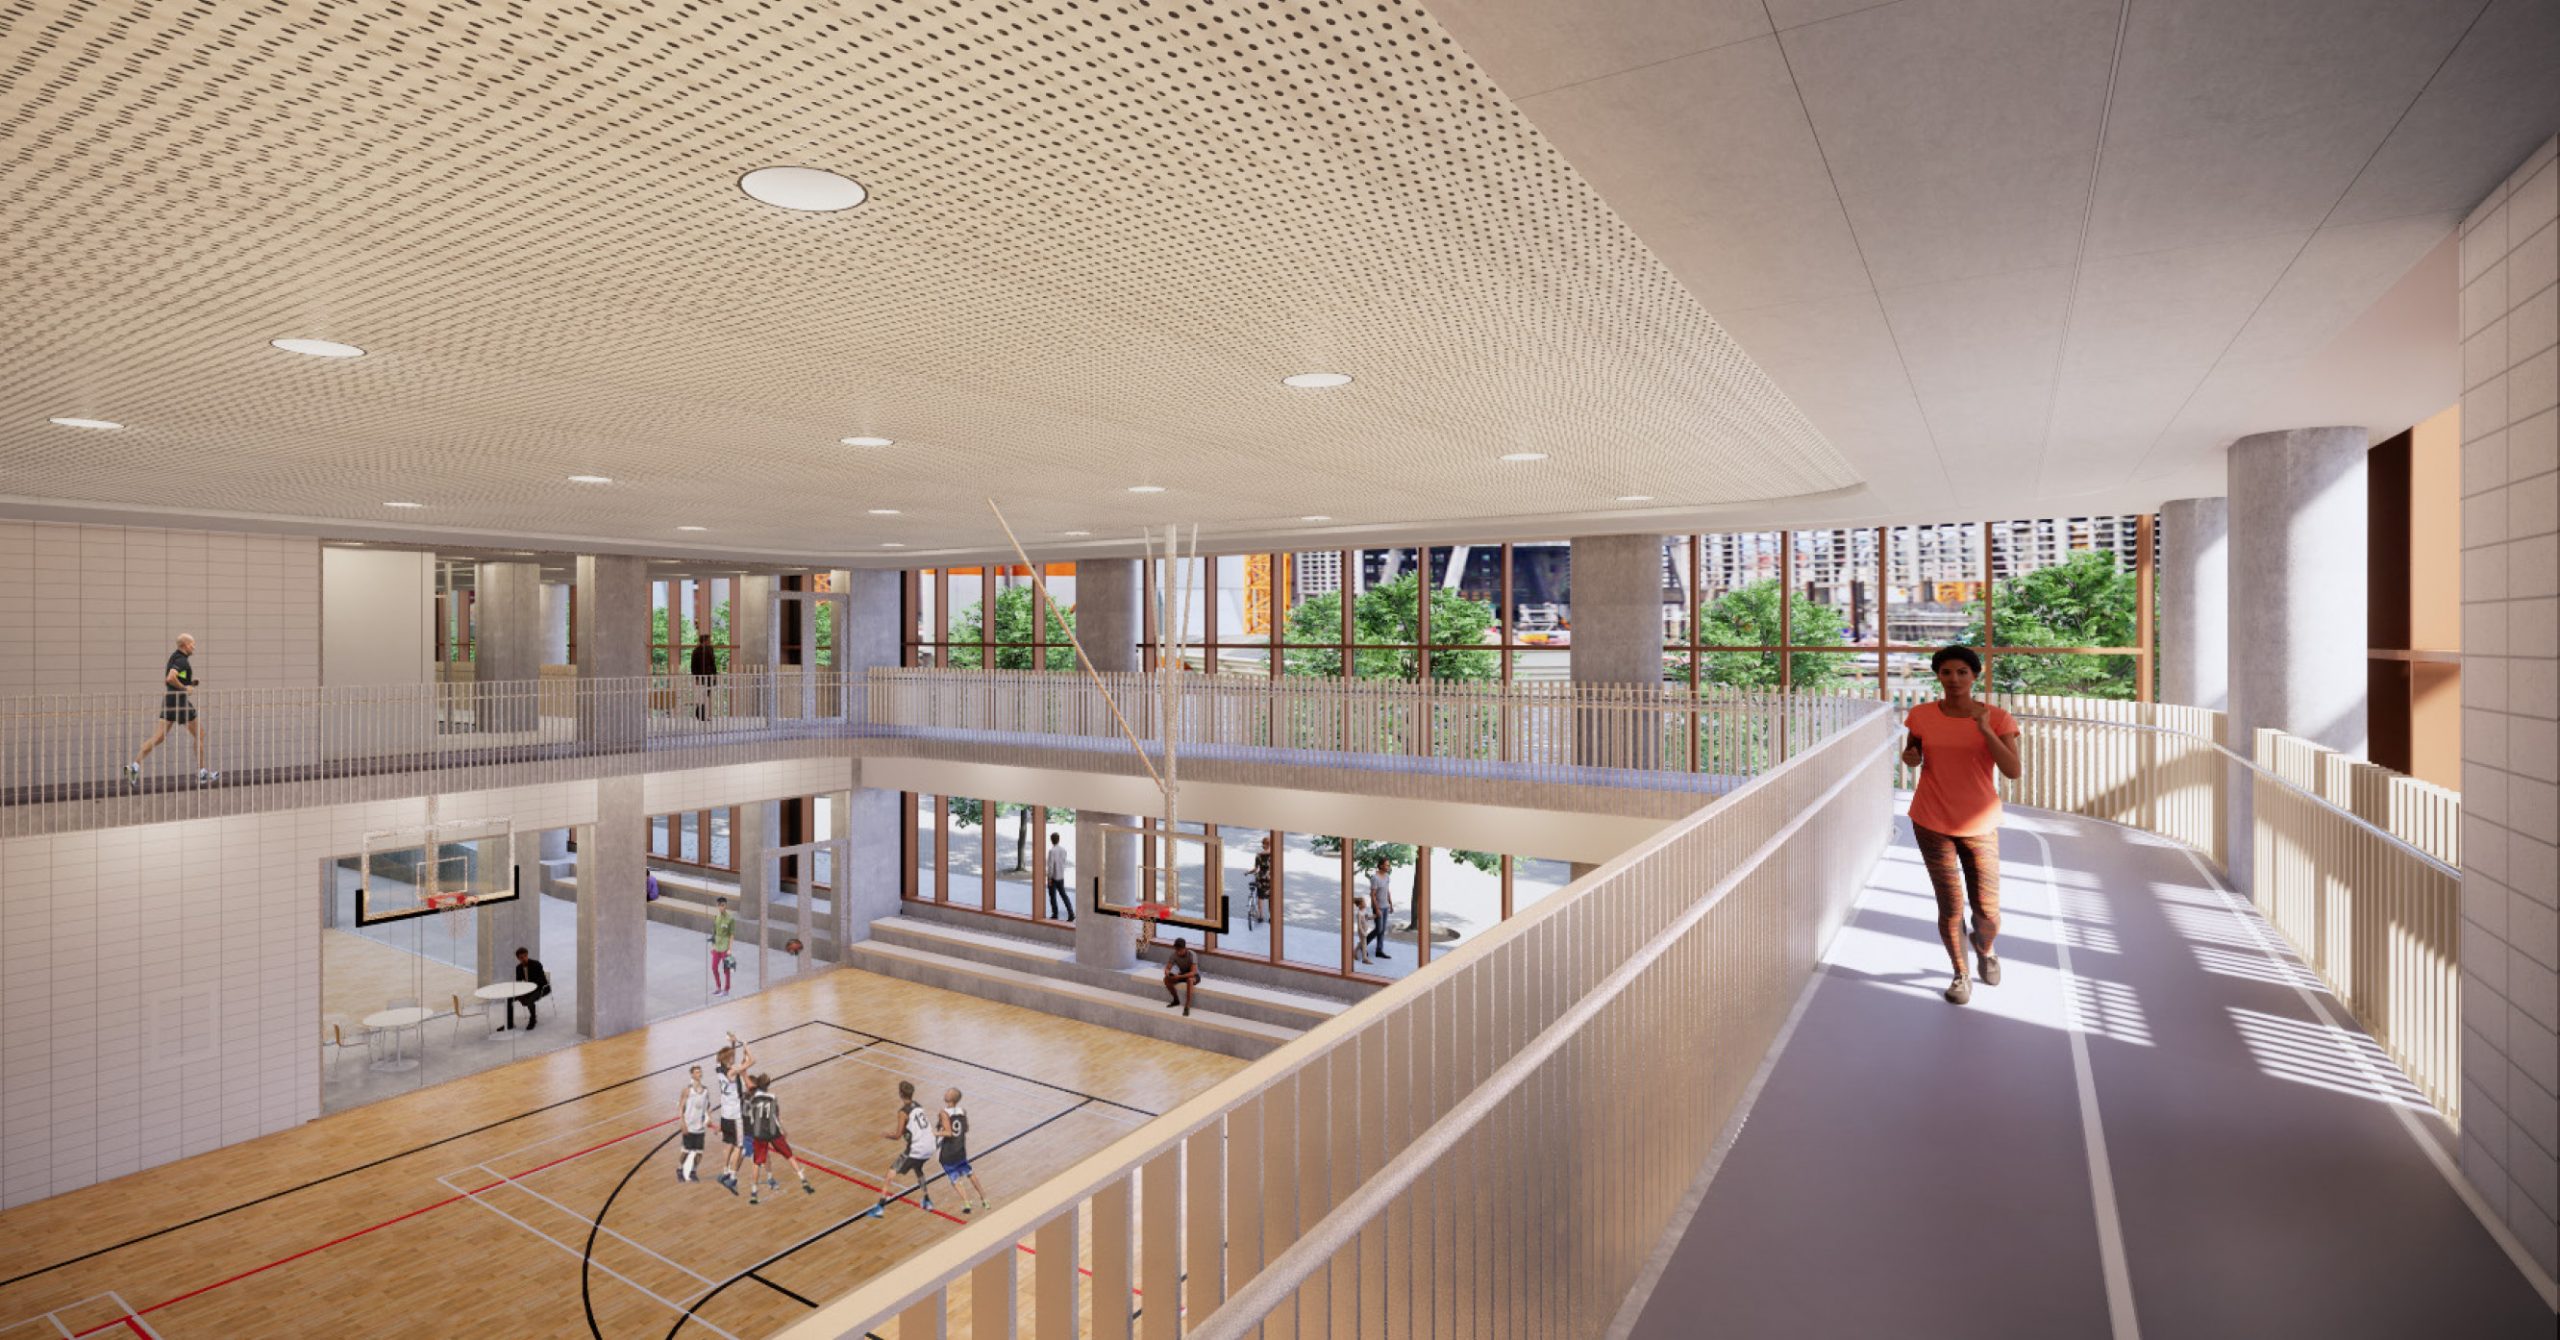 An illustration of the community recreation centre track, located on the second floor, which shows people running. Below the track are people playing basketball in the gymnasium.